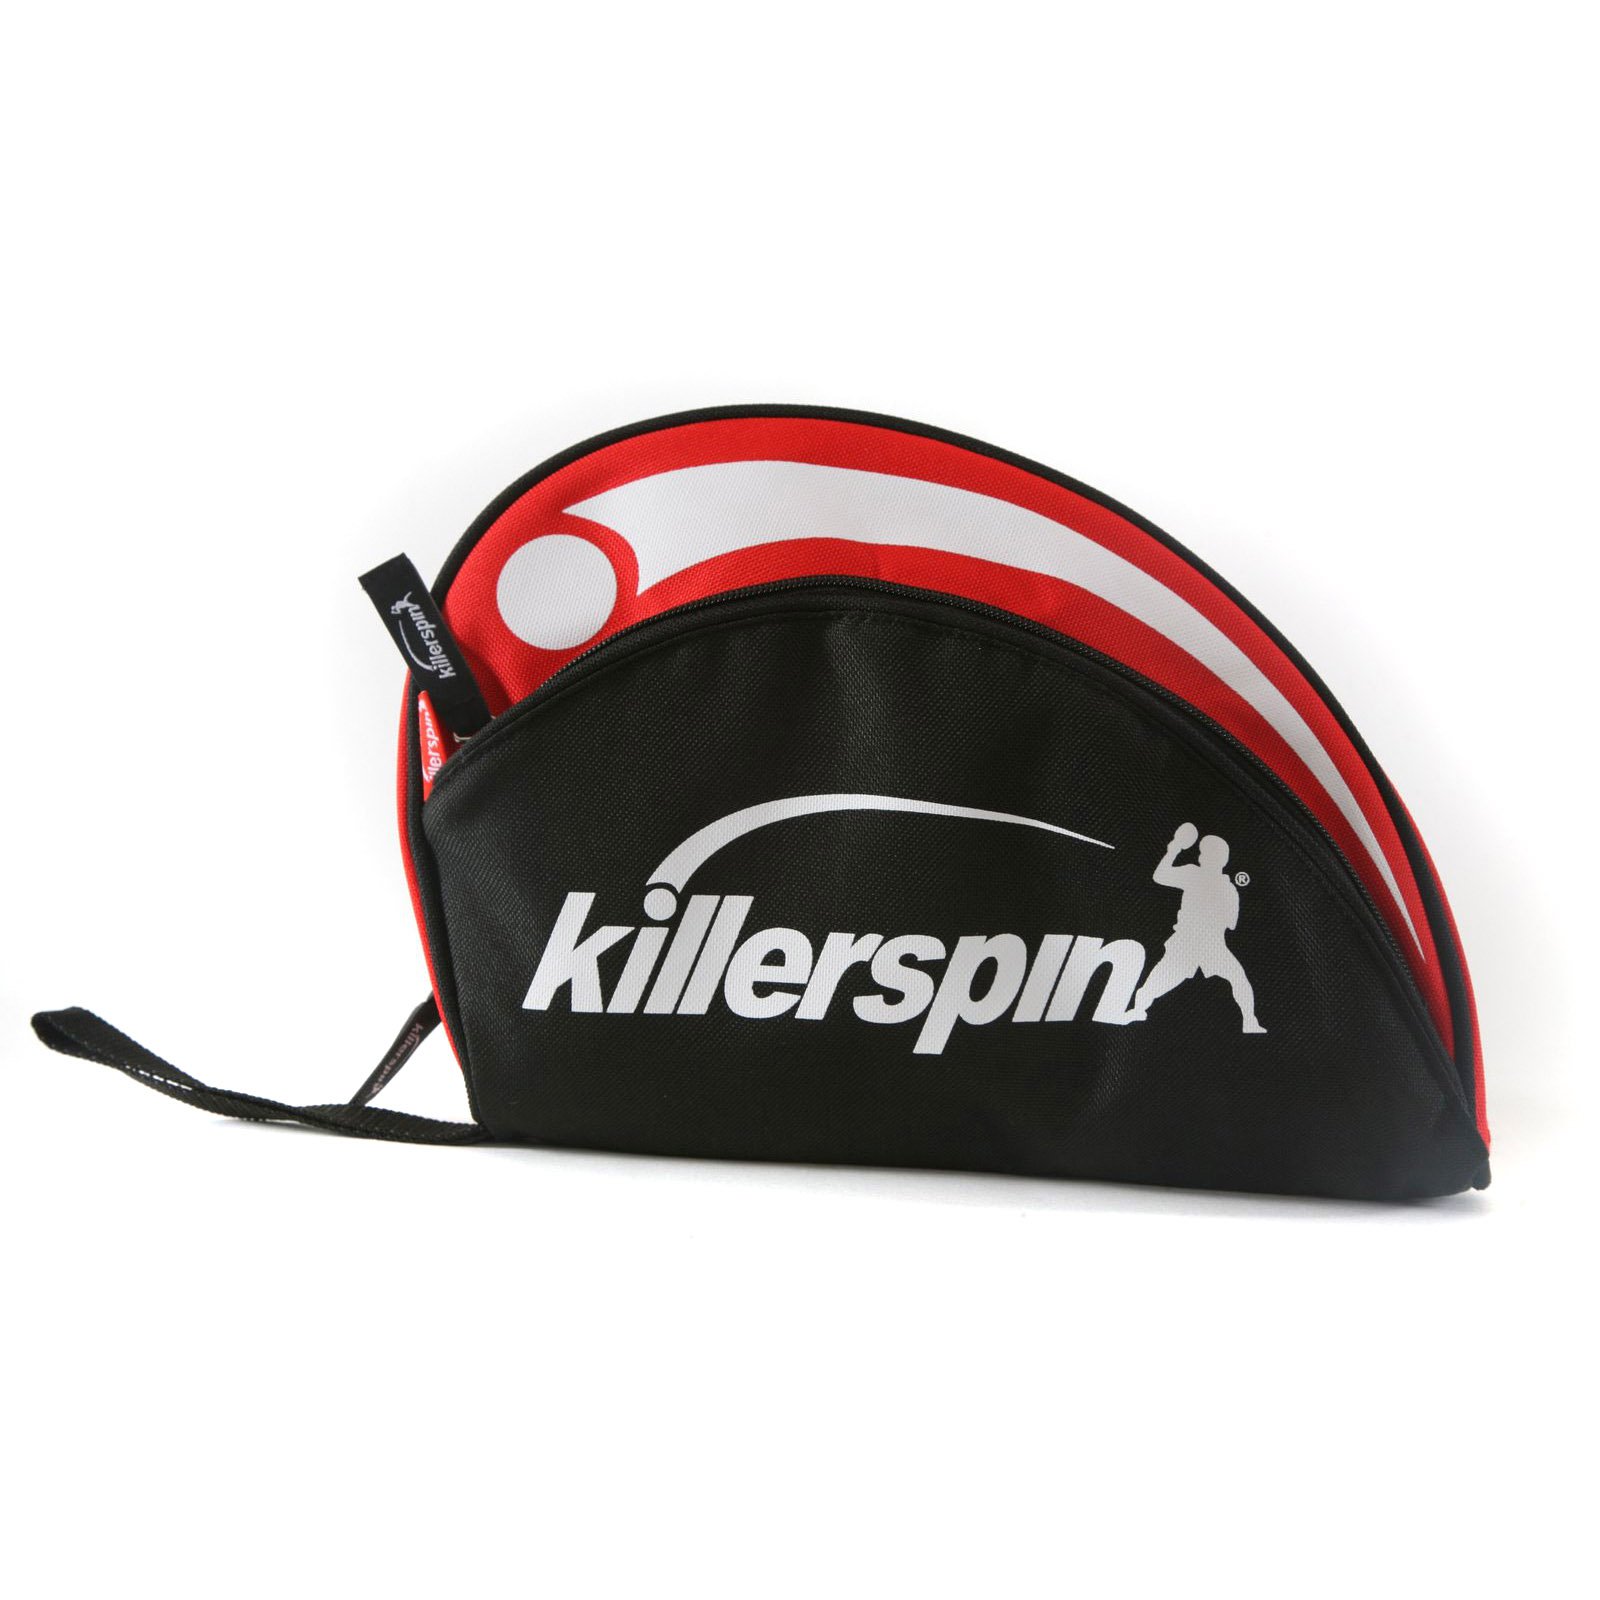 Killerspin Barracuda, Standard Size, Reinforced Padded Polyester, Table Tennis Paddle Case, Red - image 1 of 4